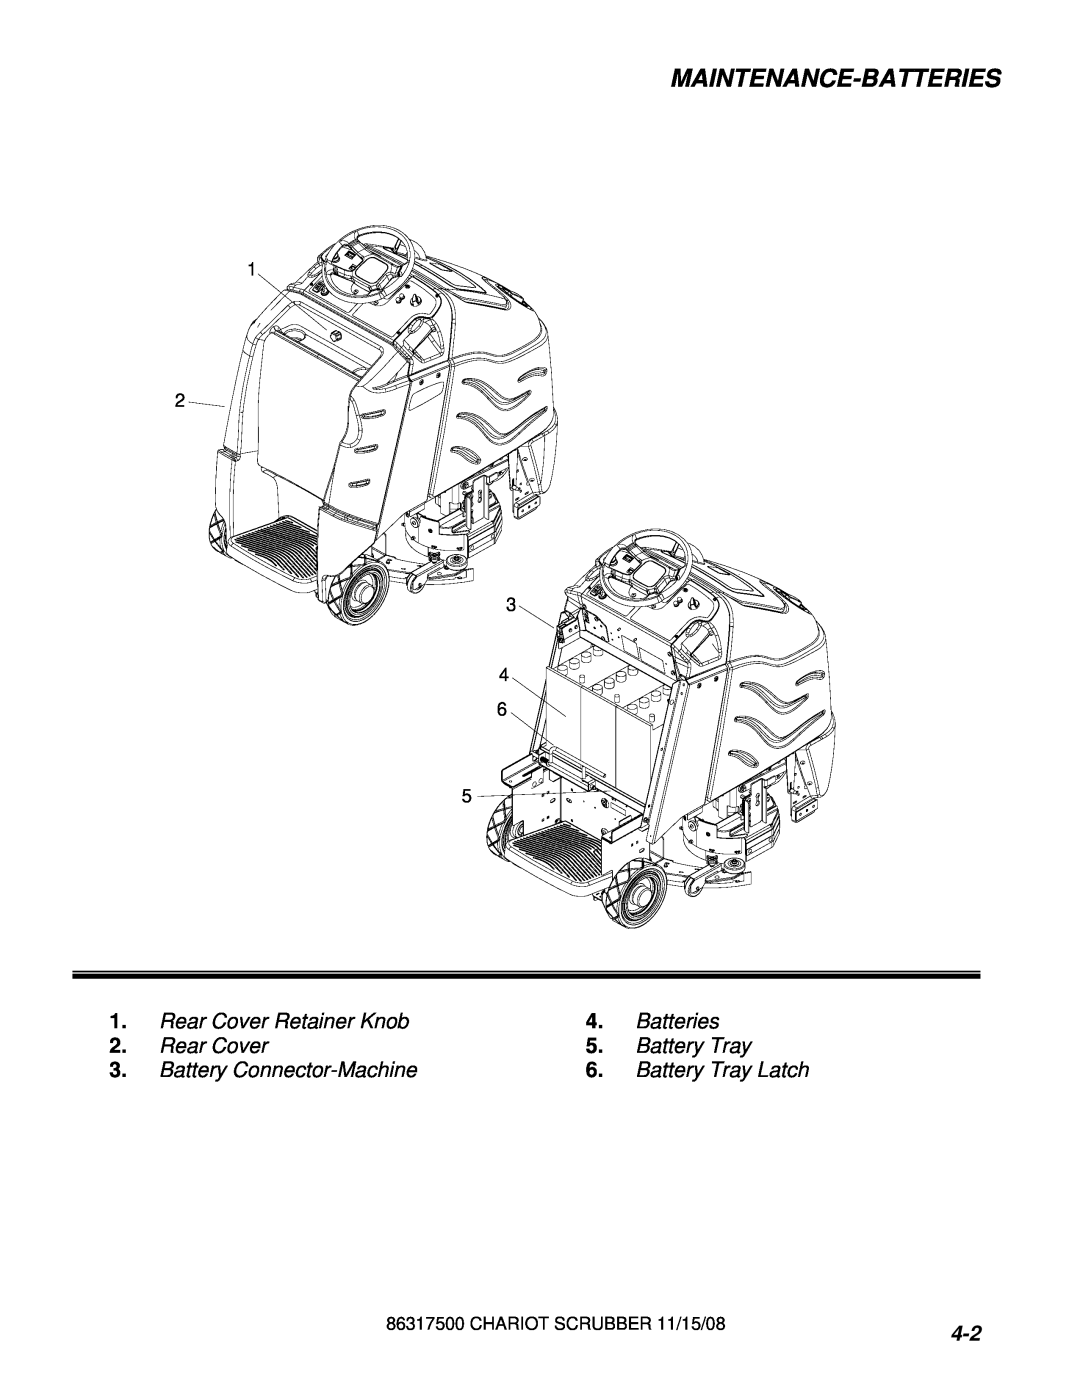 Windsor 10061160 manual Maintenance-Batteries, Rear Cover Retainer Knob, Battery Tray, Battery Connector-Machine, 1 2 3 4 6 